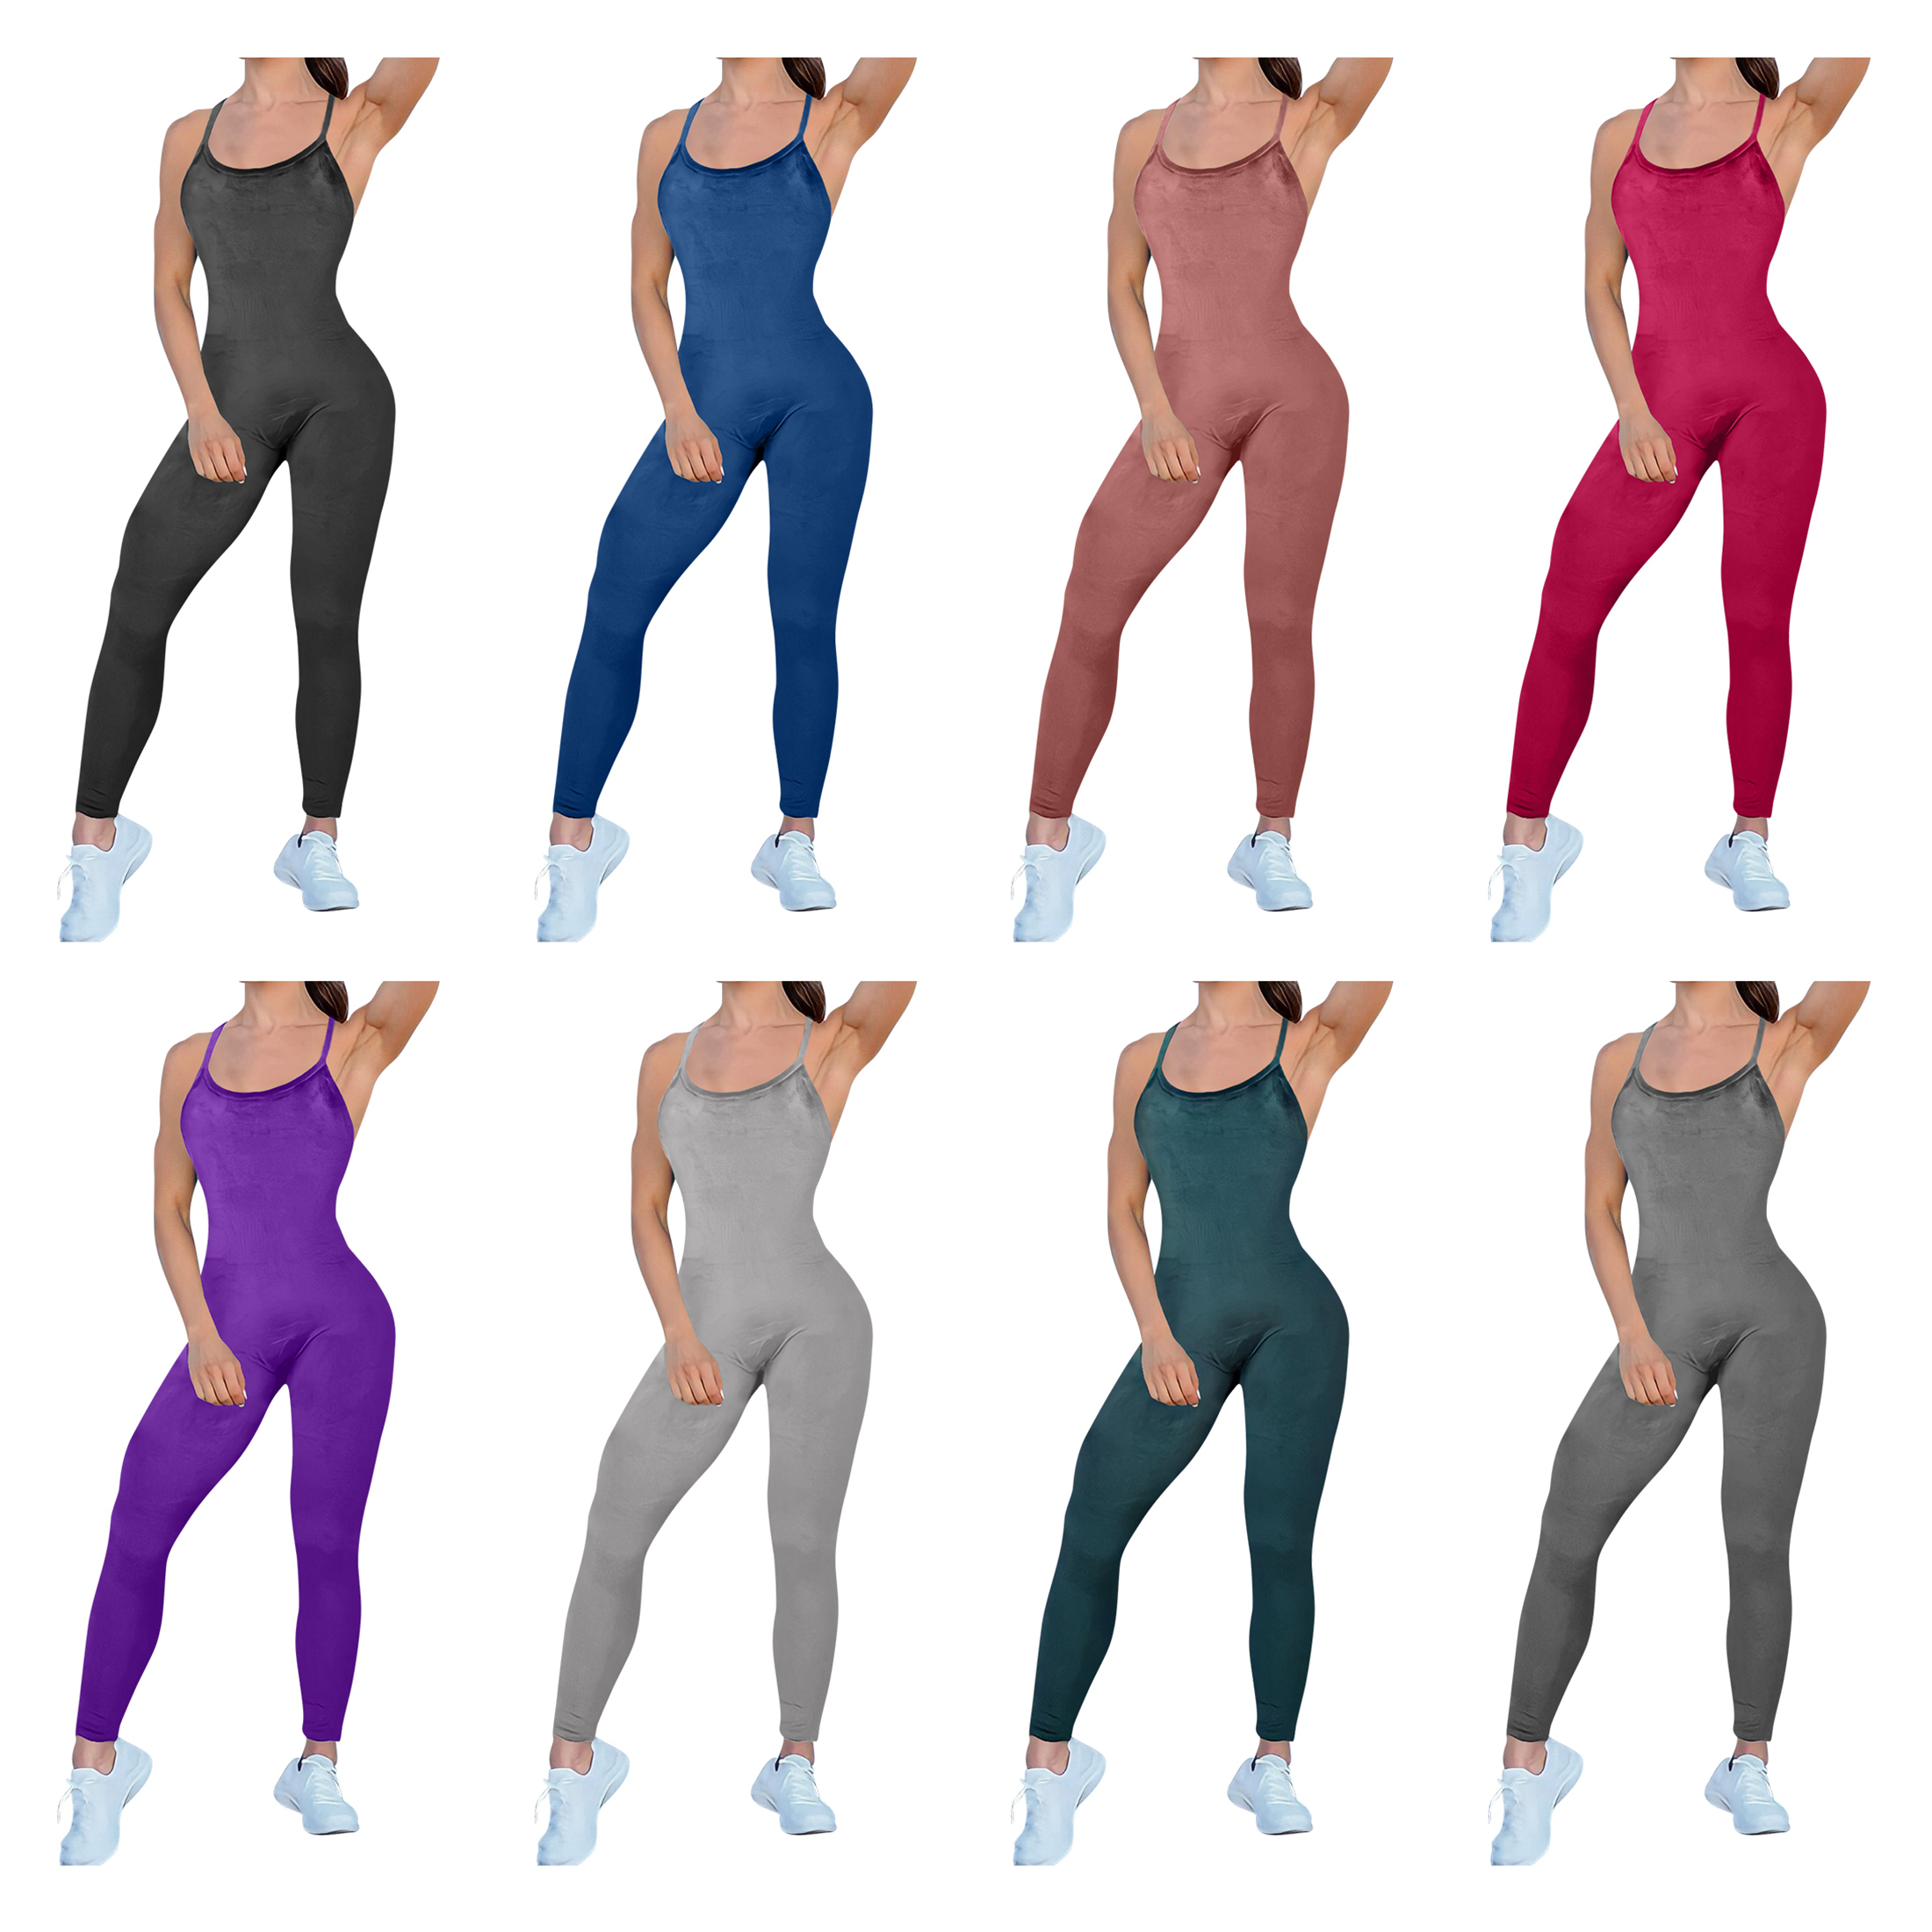 2-Pack Women's Spaghetti Strap Velour Jumpsuits One Piece Full Length Bodycon Sleeveless Yoga Exercise Rompers - L